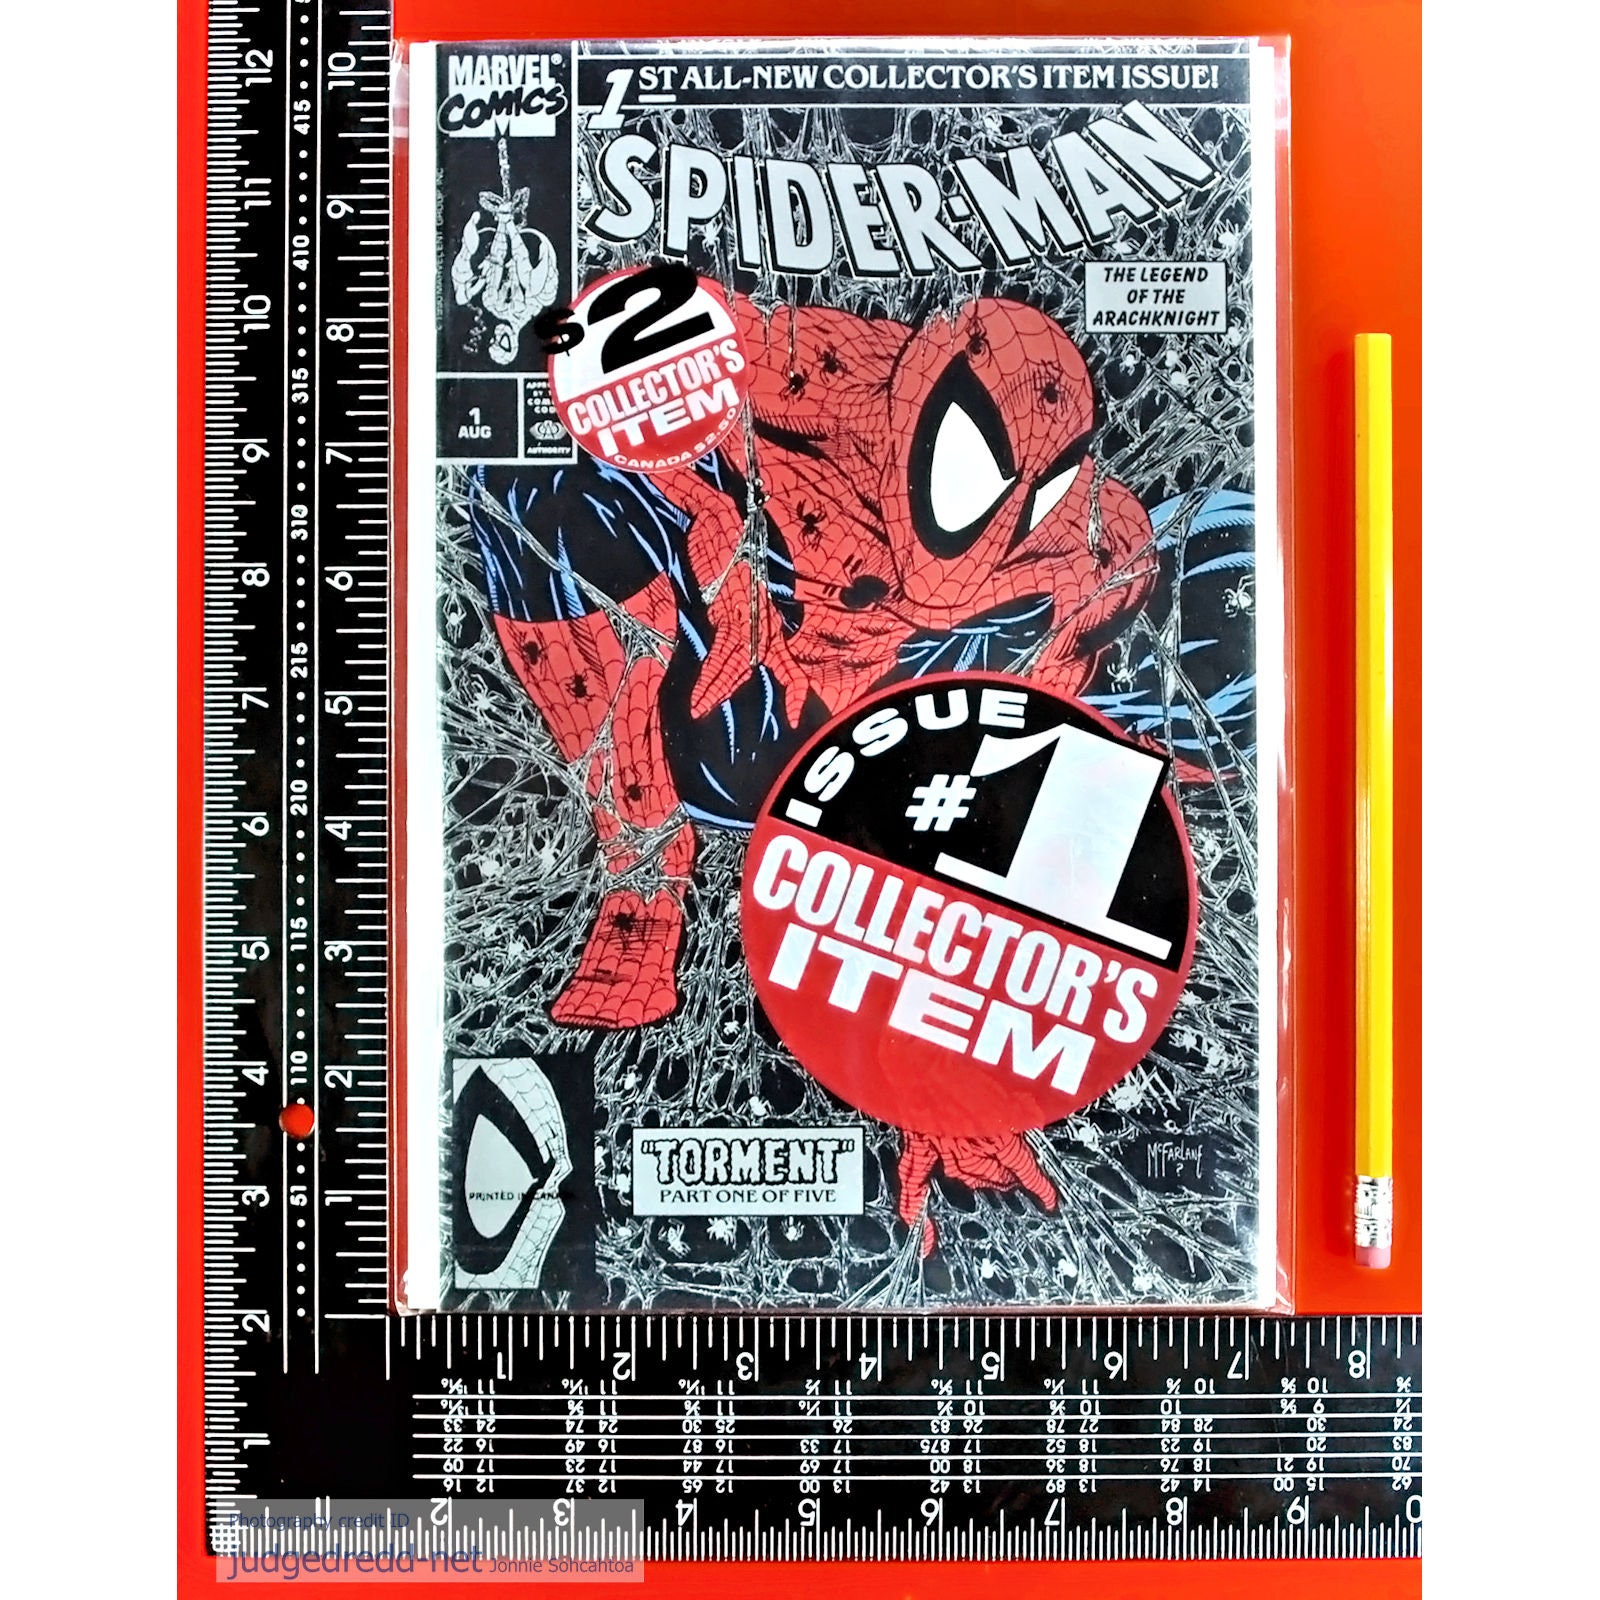 1000 RESEALABLE Silver Age Max Pro Comic Book Bags + Acid Free Backer  Boards 817202020190